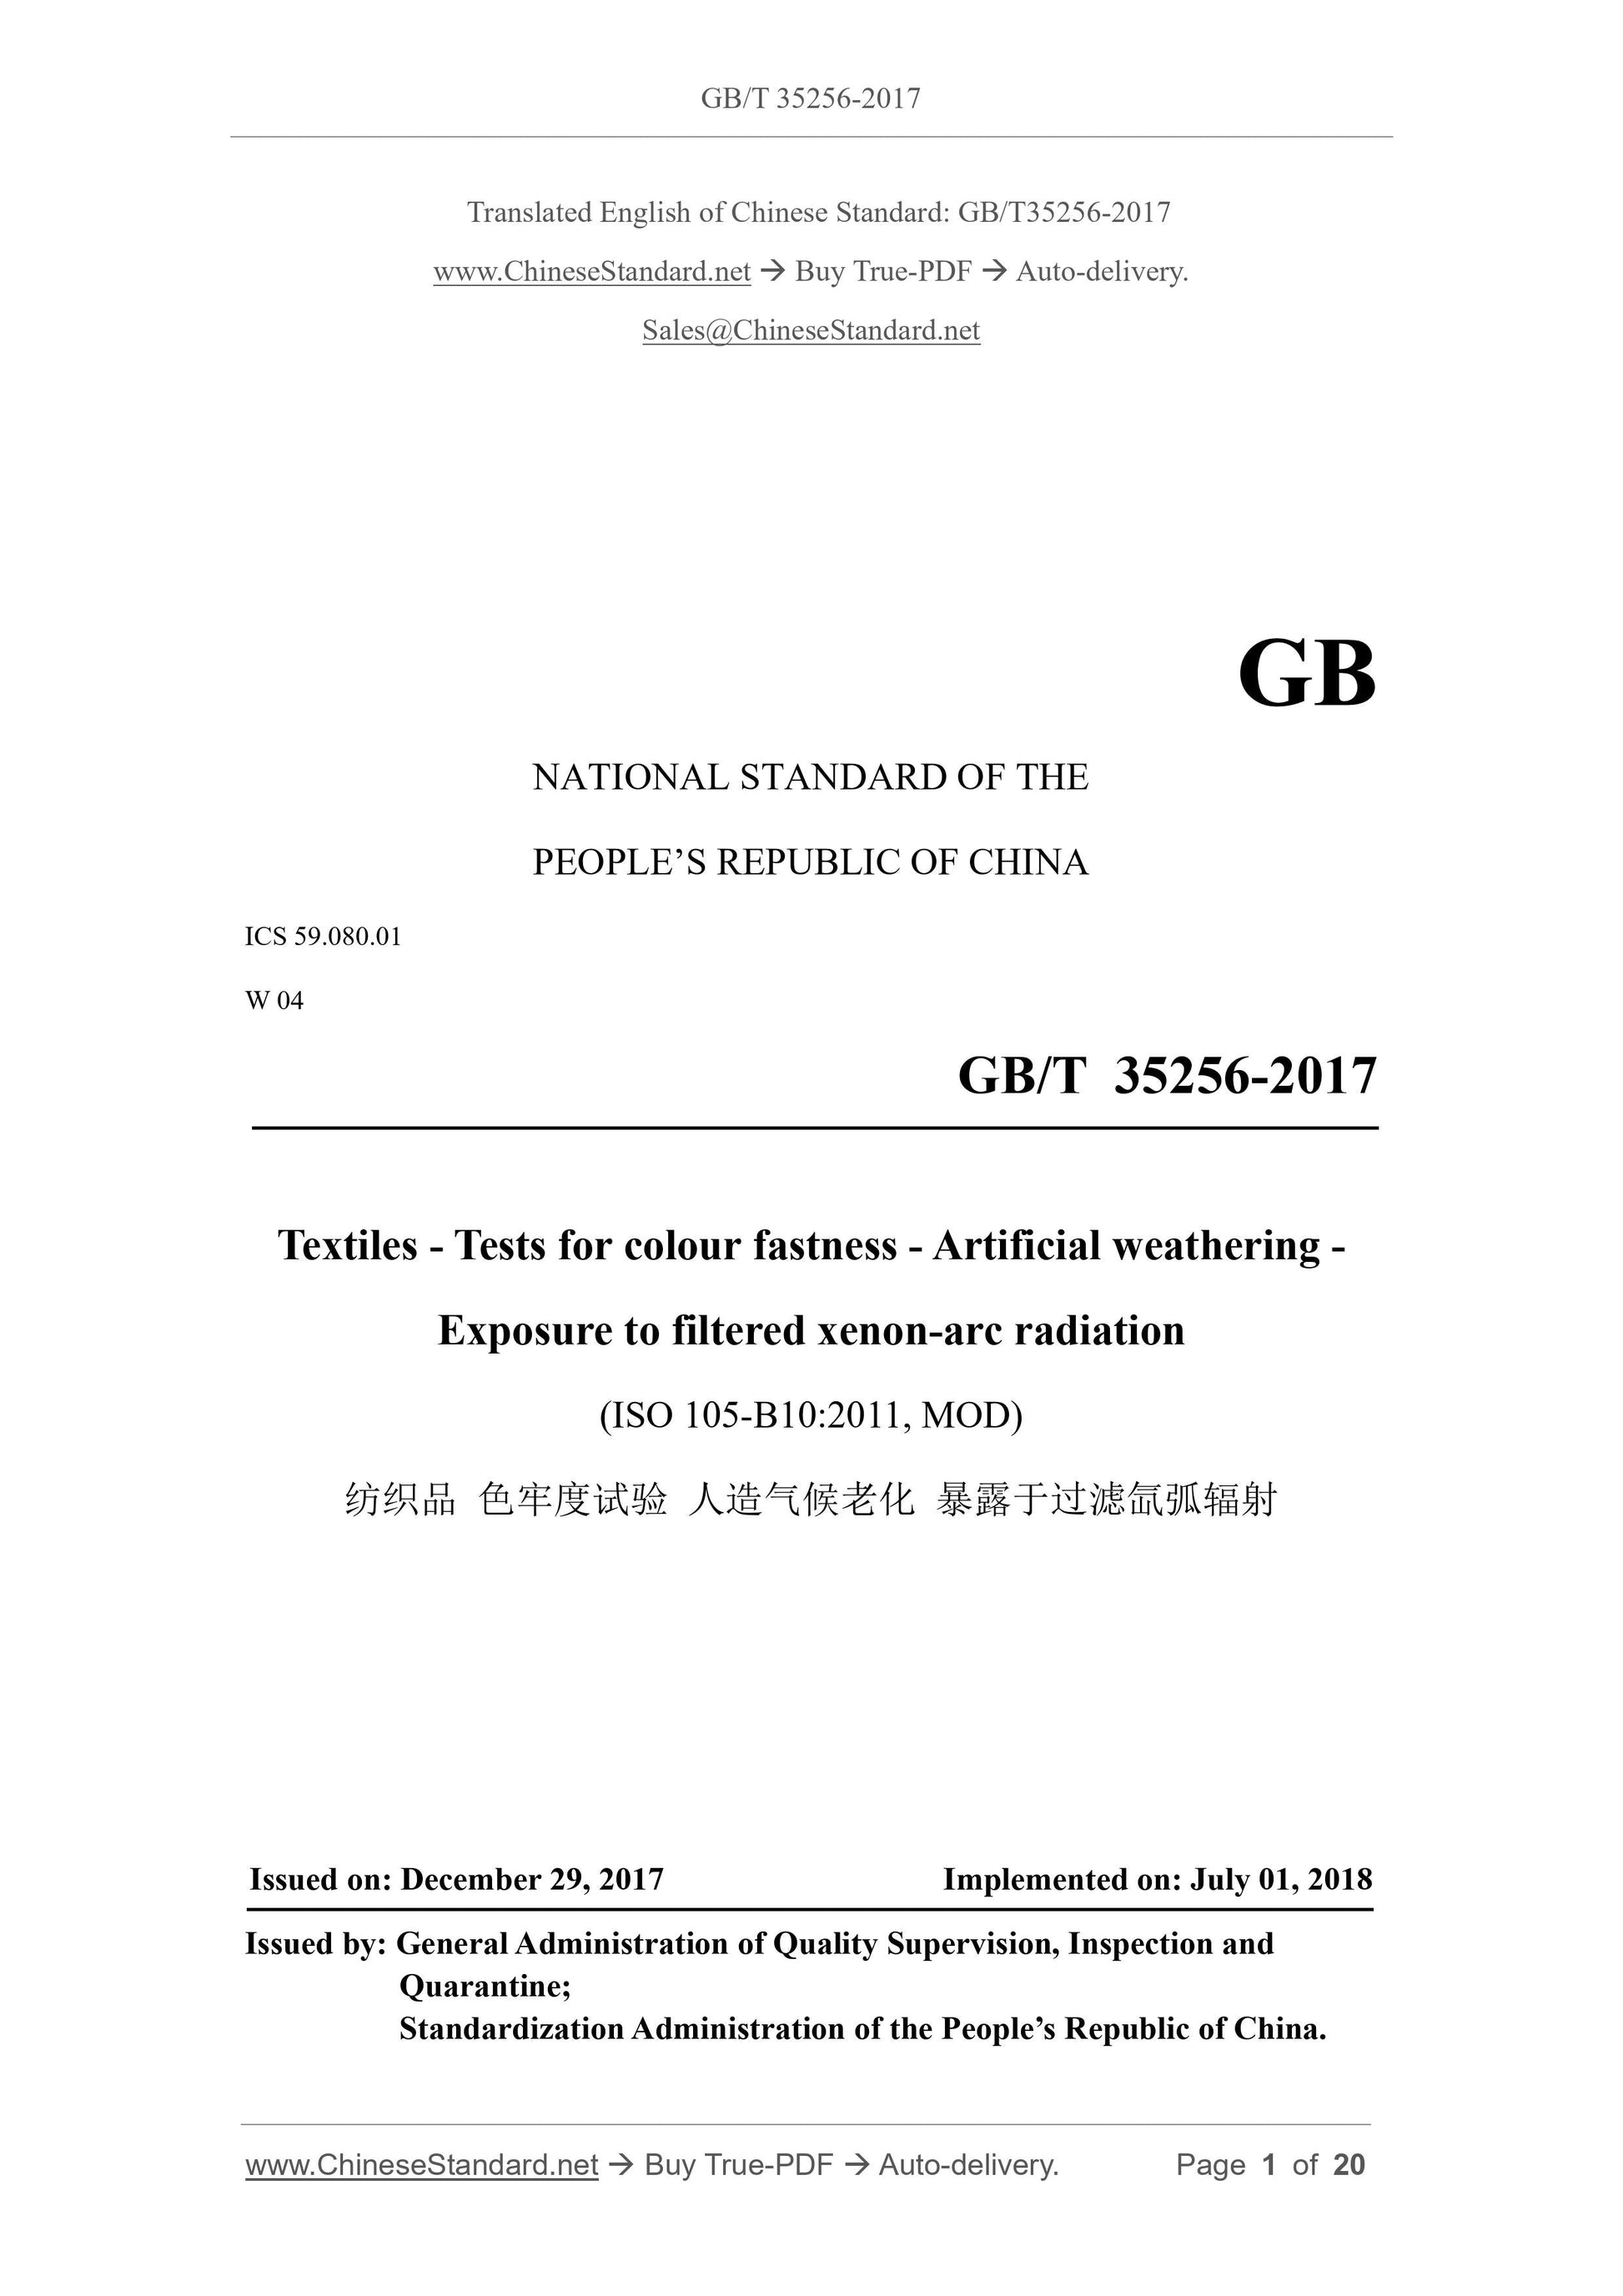 GB/T 35256-2017 Page 1